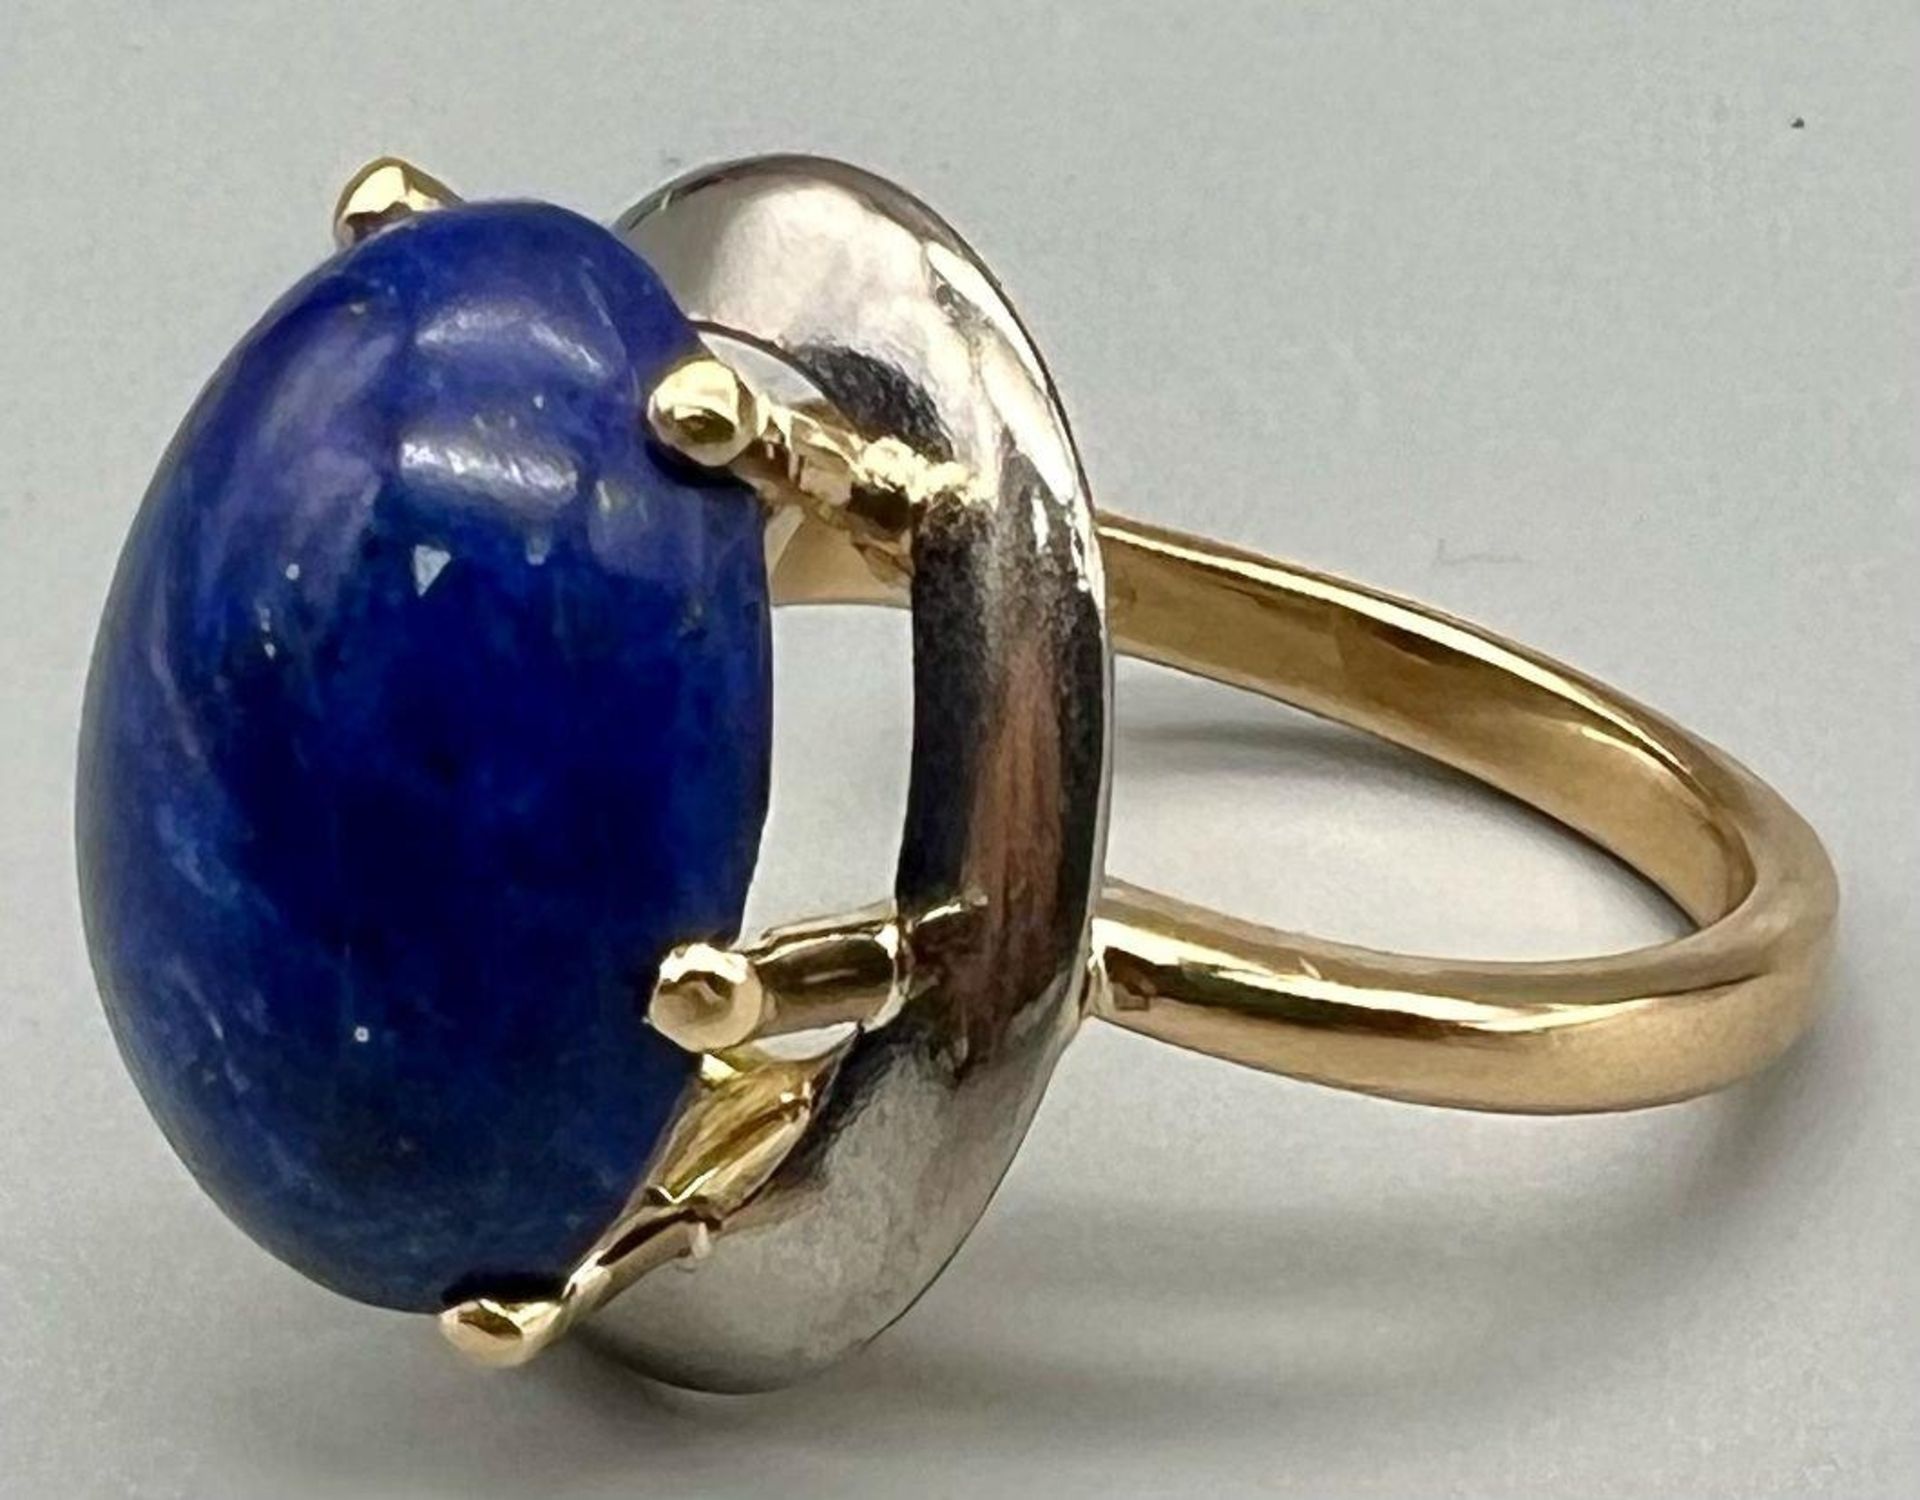 A beautiful 18K yellow and white gold ring with a large lapis lazuli cabochon. Ring size: Q1/2, - Bild 2 aus 4